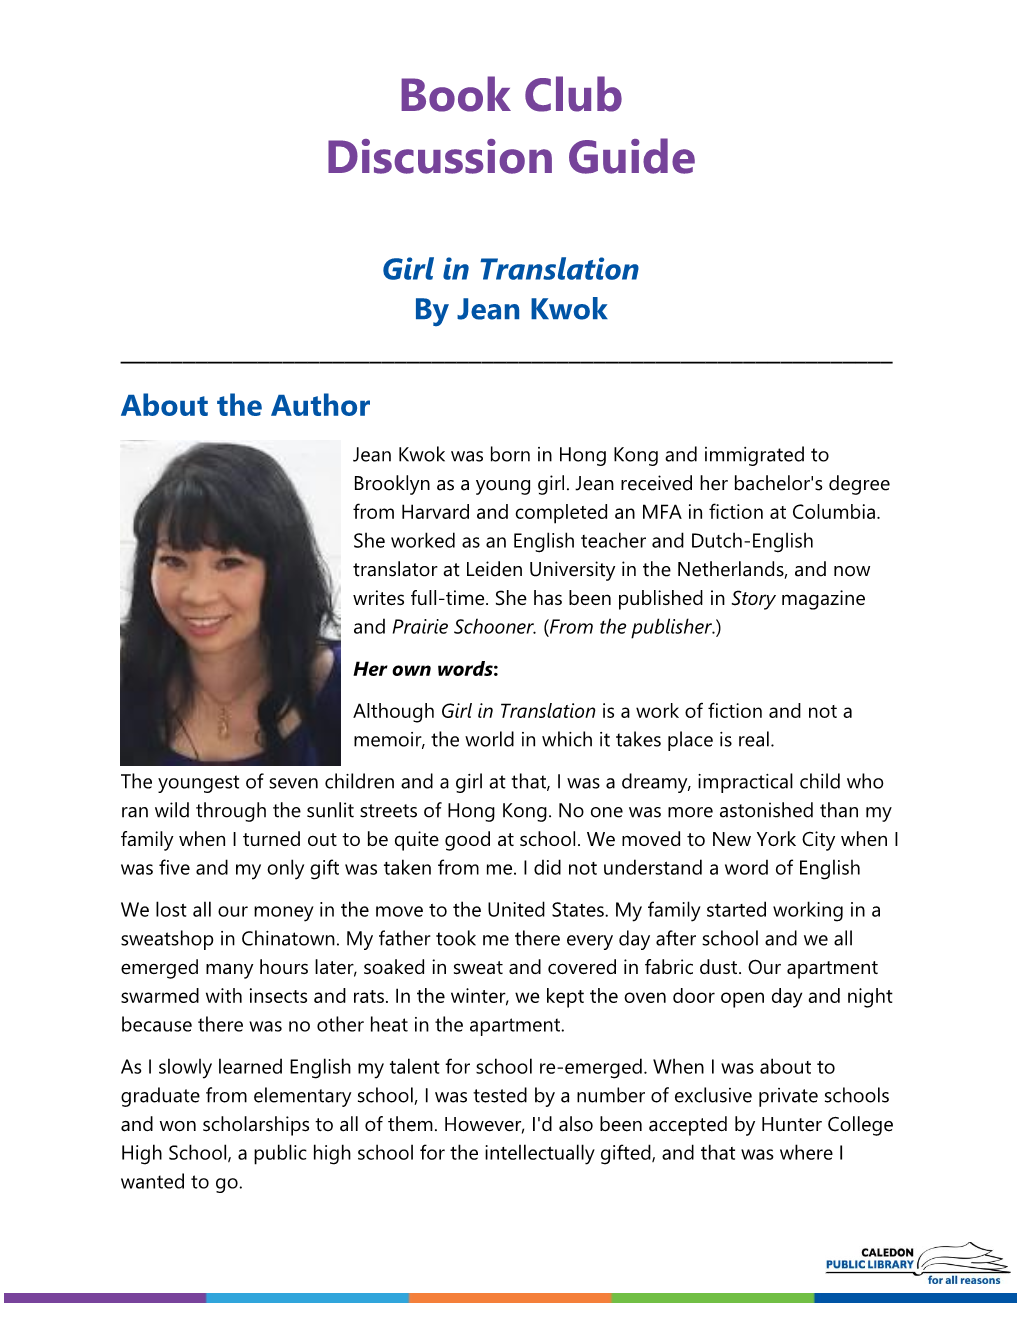 Girl in Translation by Jean Kwok ______About the Author